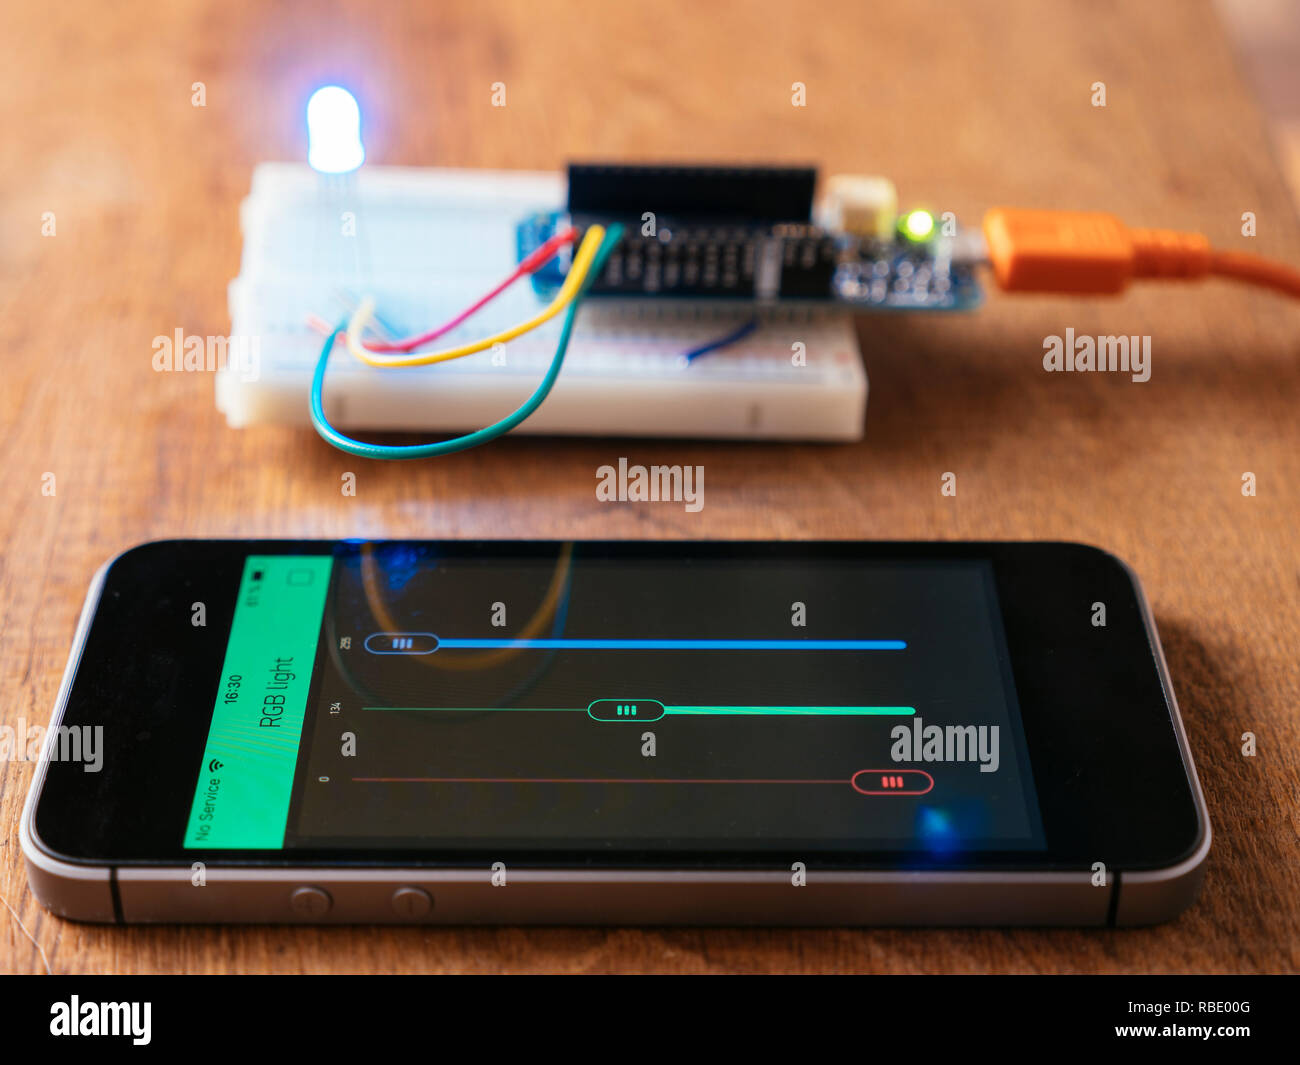 RGB Led on a breadboard with microcontroller board being controlled by a mobile phone app. Stock Photo